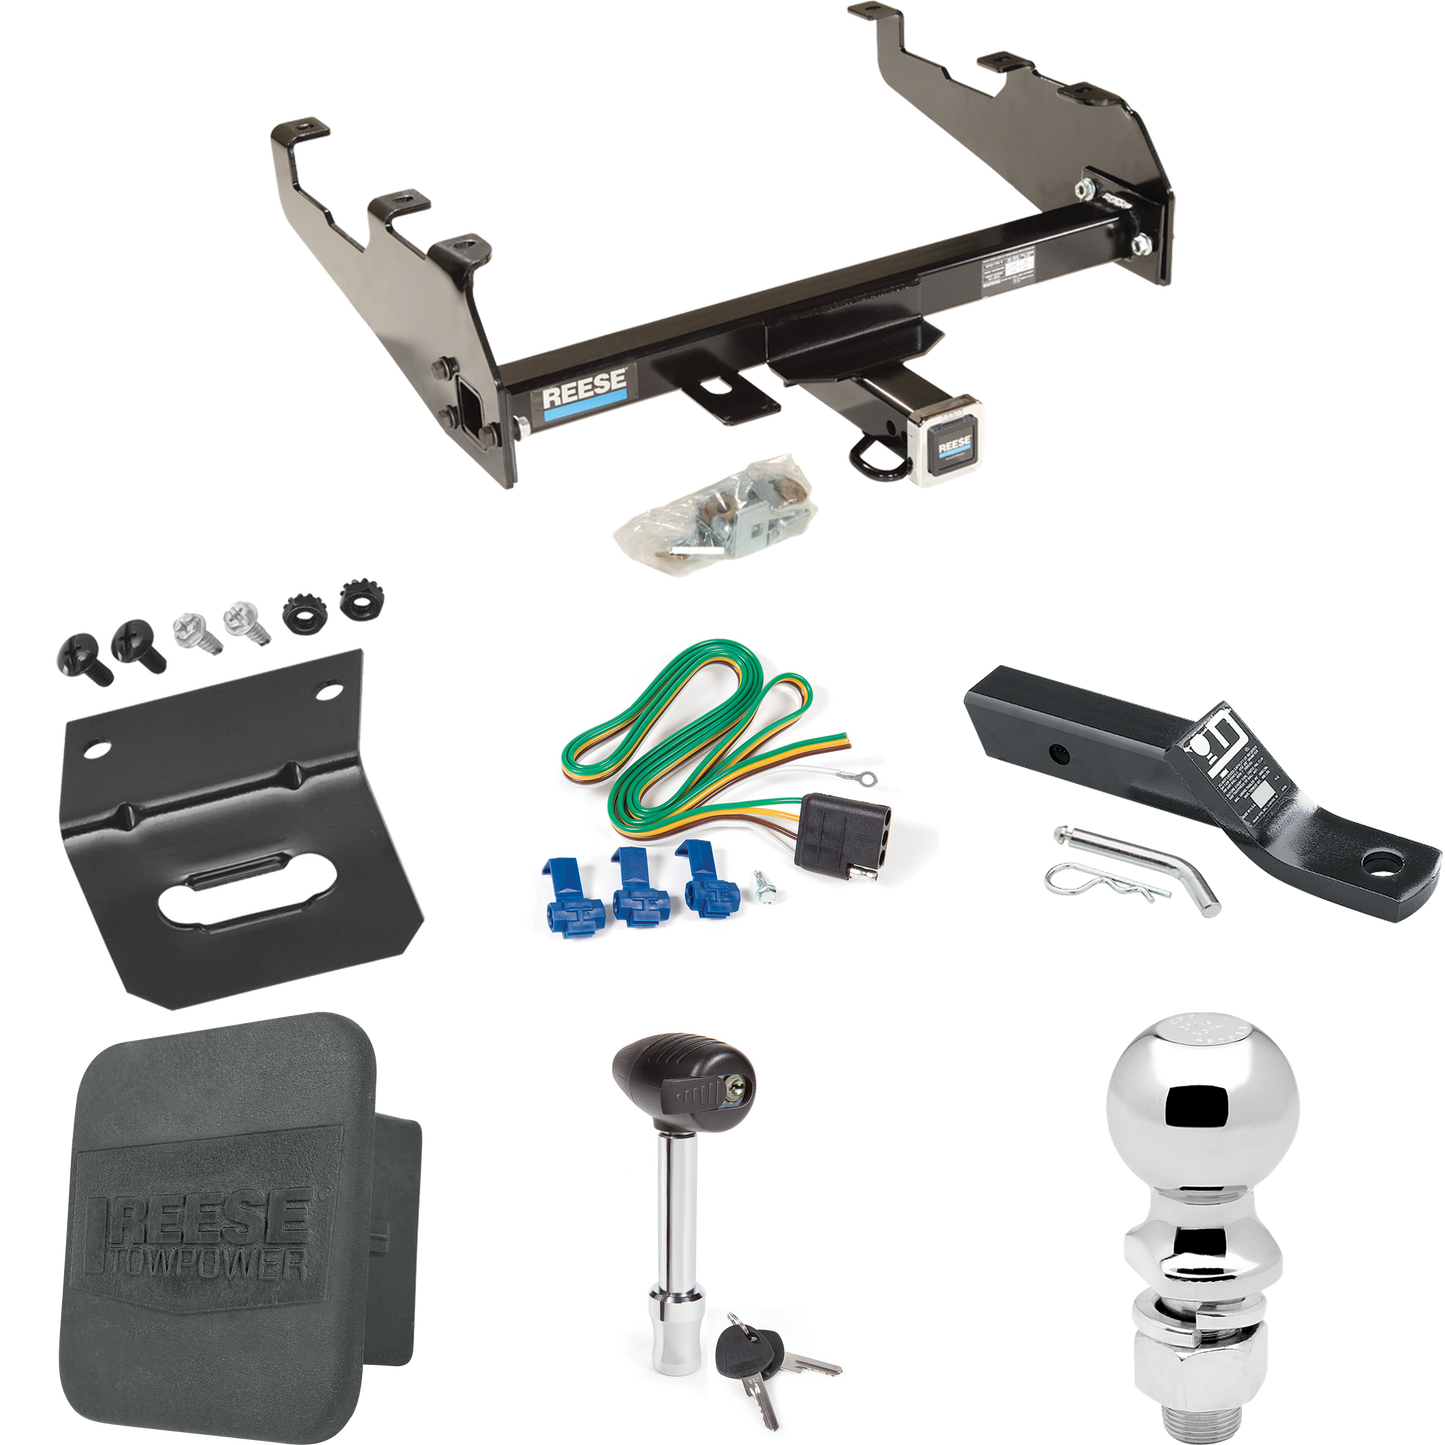 Fits 1963-1972 Chevrolet K20 Trailer Hitch Tow PKG w/ 4-Flat Wiring + Ball Mount w/ 2" Drop + 2-5/16" Ball + Wiring Bracket + Hitch Lock + Hitch Cover (For w/Deep Drop Bumper Models) By Reese Towpower